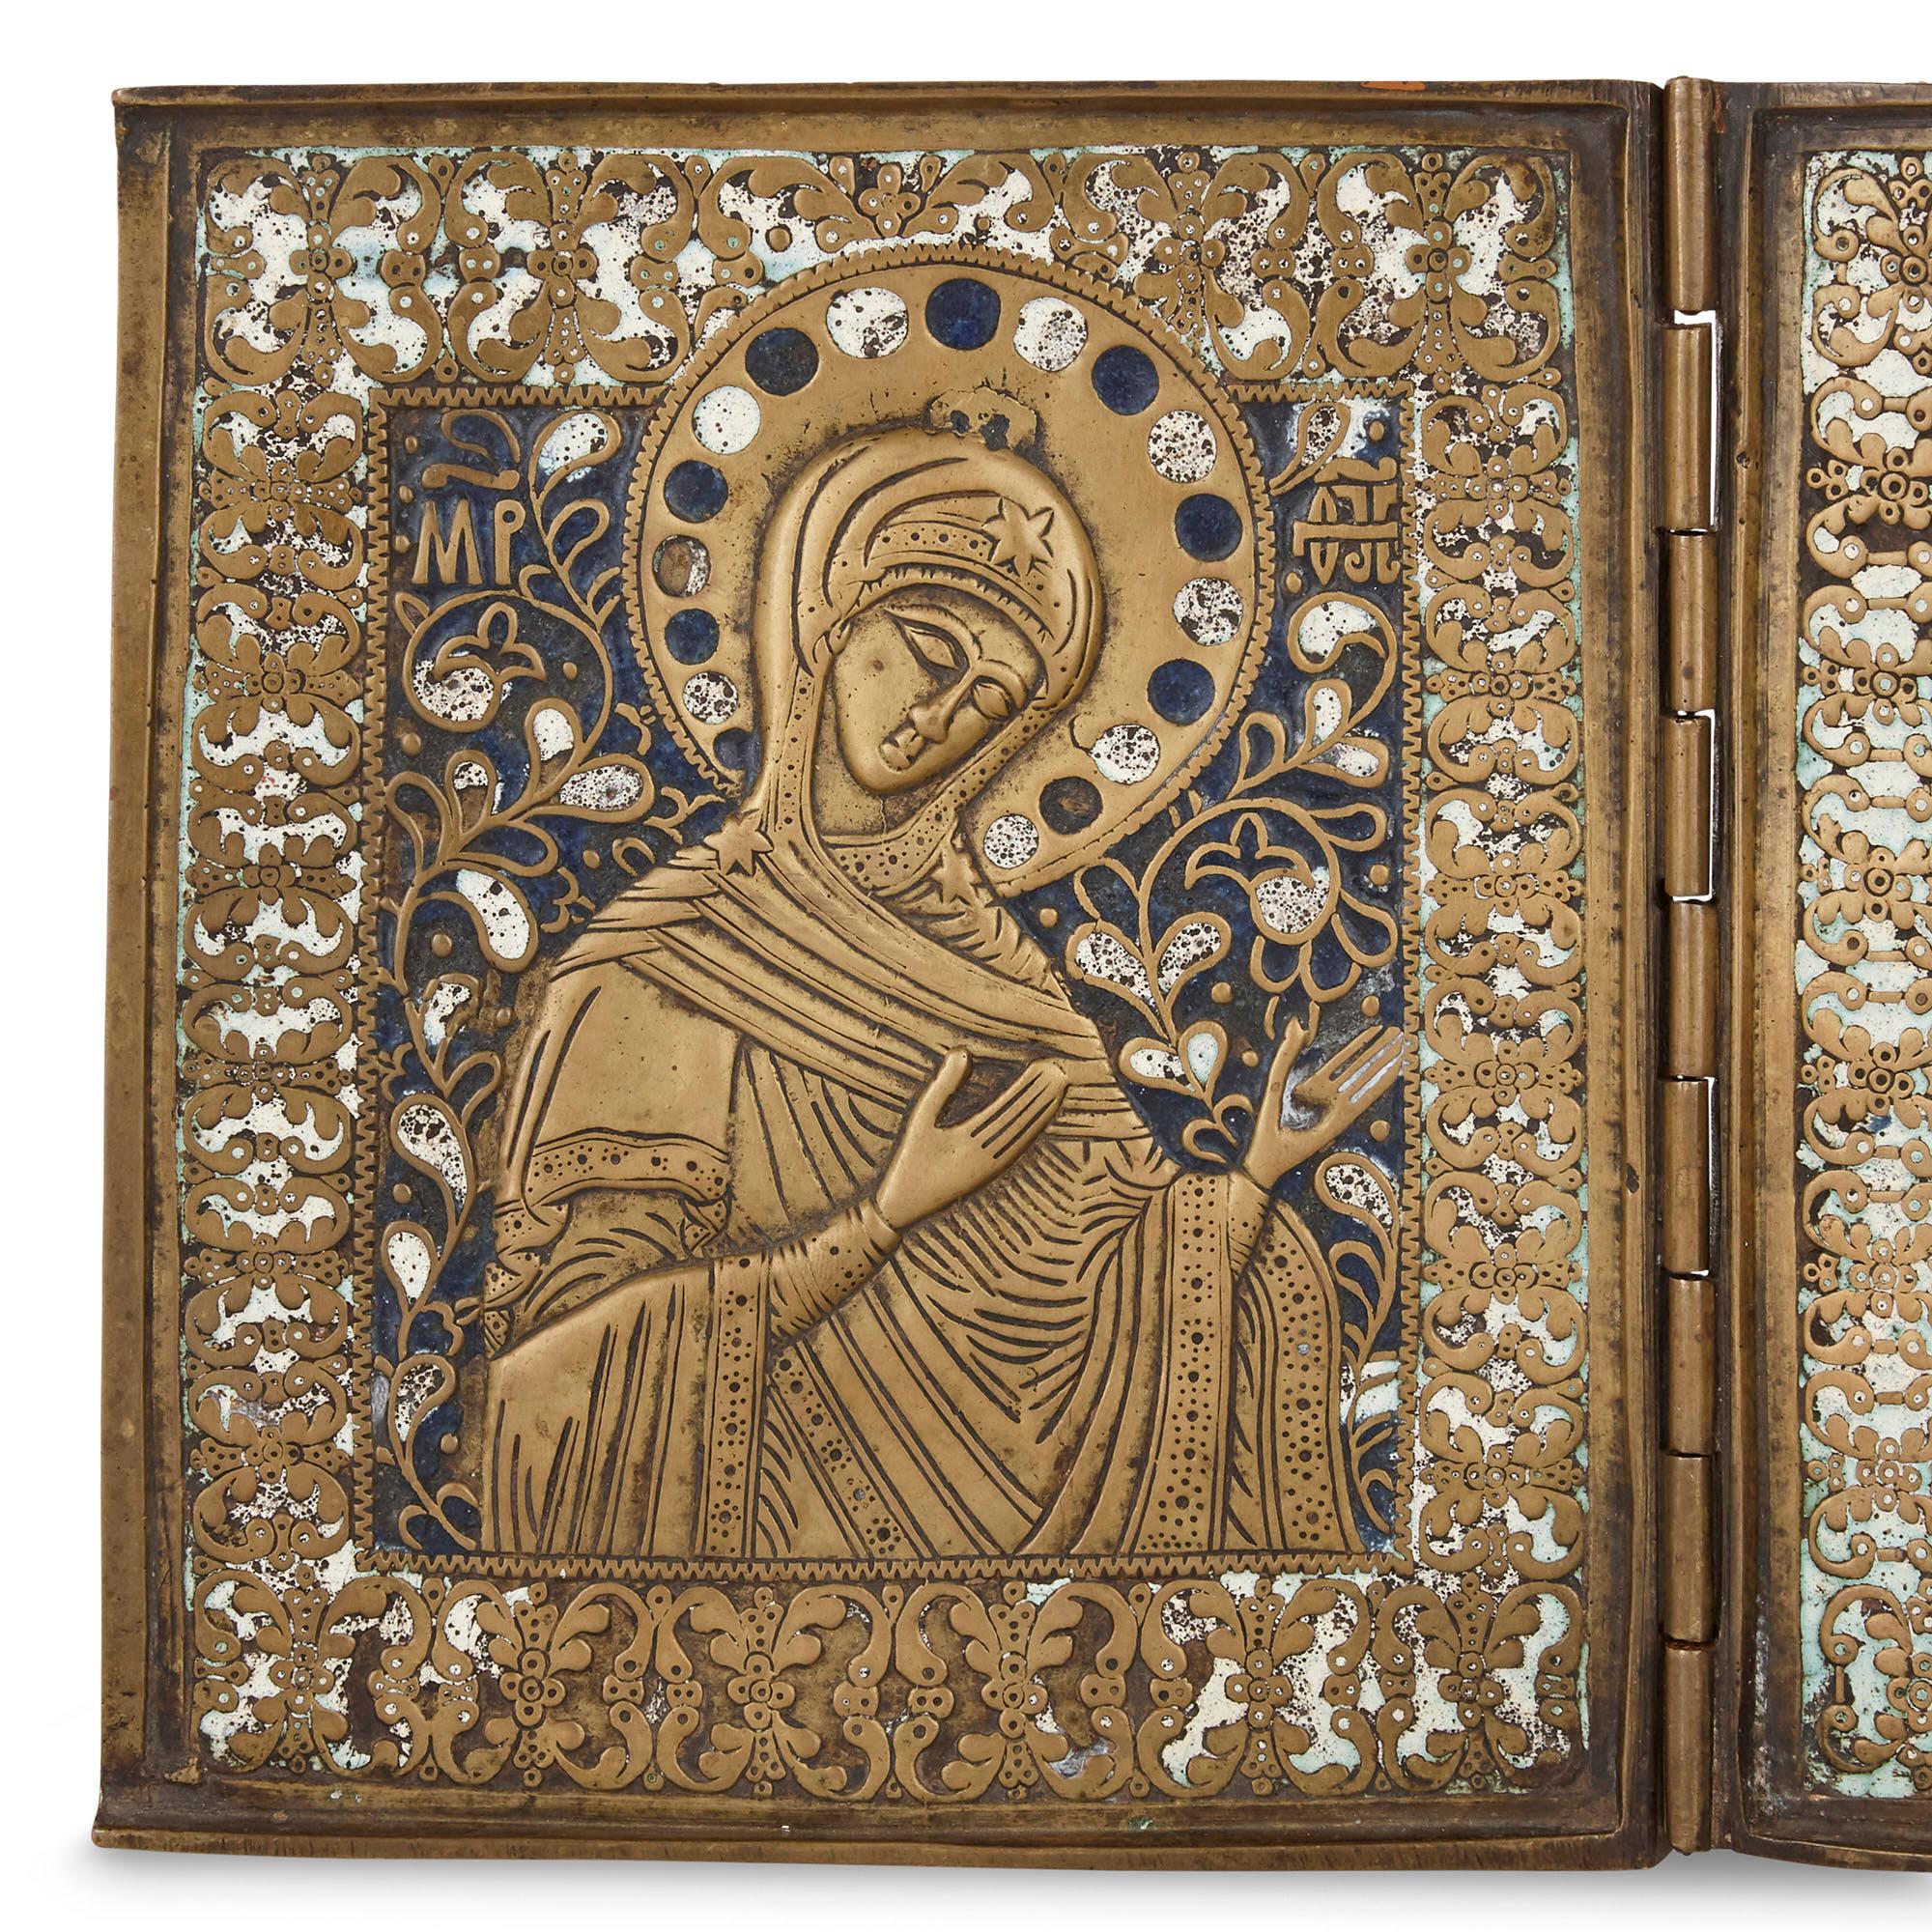 This three-panel folding icon, a triptych, is wrought from bronze and enamel. The three panels contain religious images: the central panel portrays Christ, while the flanking panels portray saints. The figures, articulated in bronze relief, are